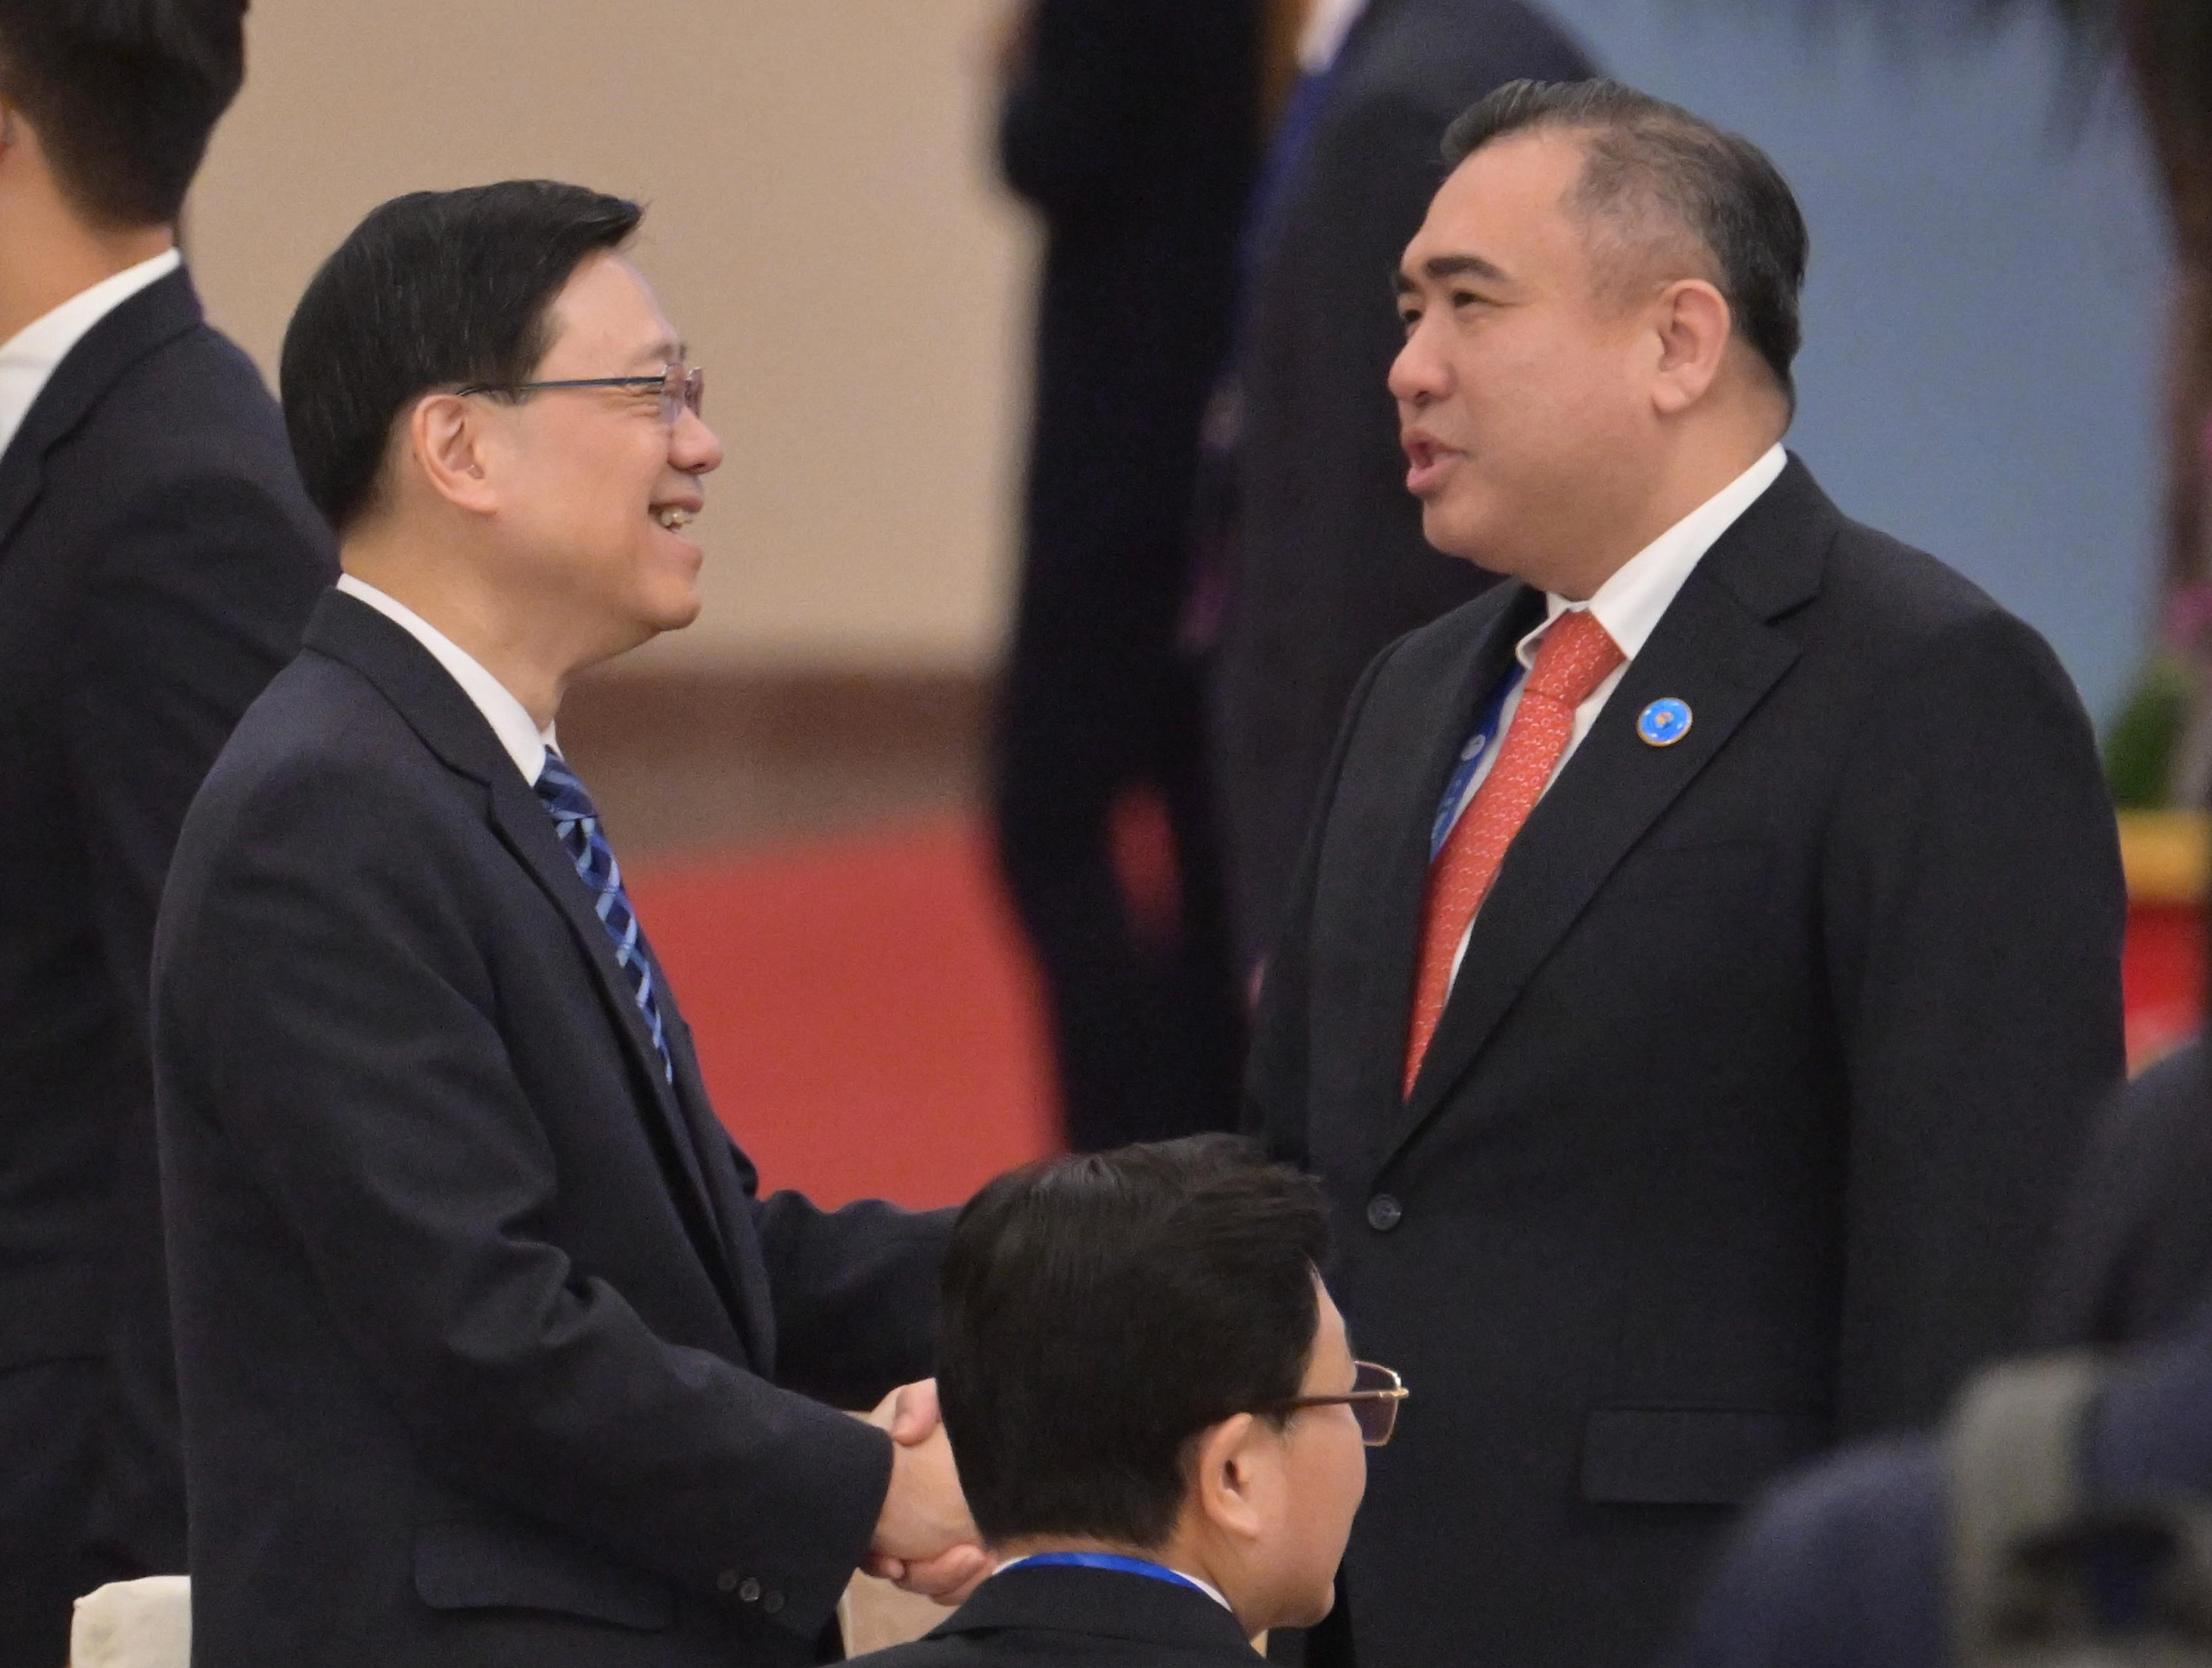 The Chief Executive, Mr John Lee, led a high-level Hong Kong Special Administrative Region delegation comprising senior government officials and members of various sectors to participate in the third Belt and Road Forum for International Cooperation in Beijing today (October 18). Photo shows Mr Lee (left) exchanging views with the Minister of Transport of Malaysia, Mr Loke Siew Fook (right), at the opening ceremony of the Forum this morning.